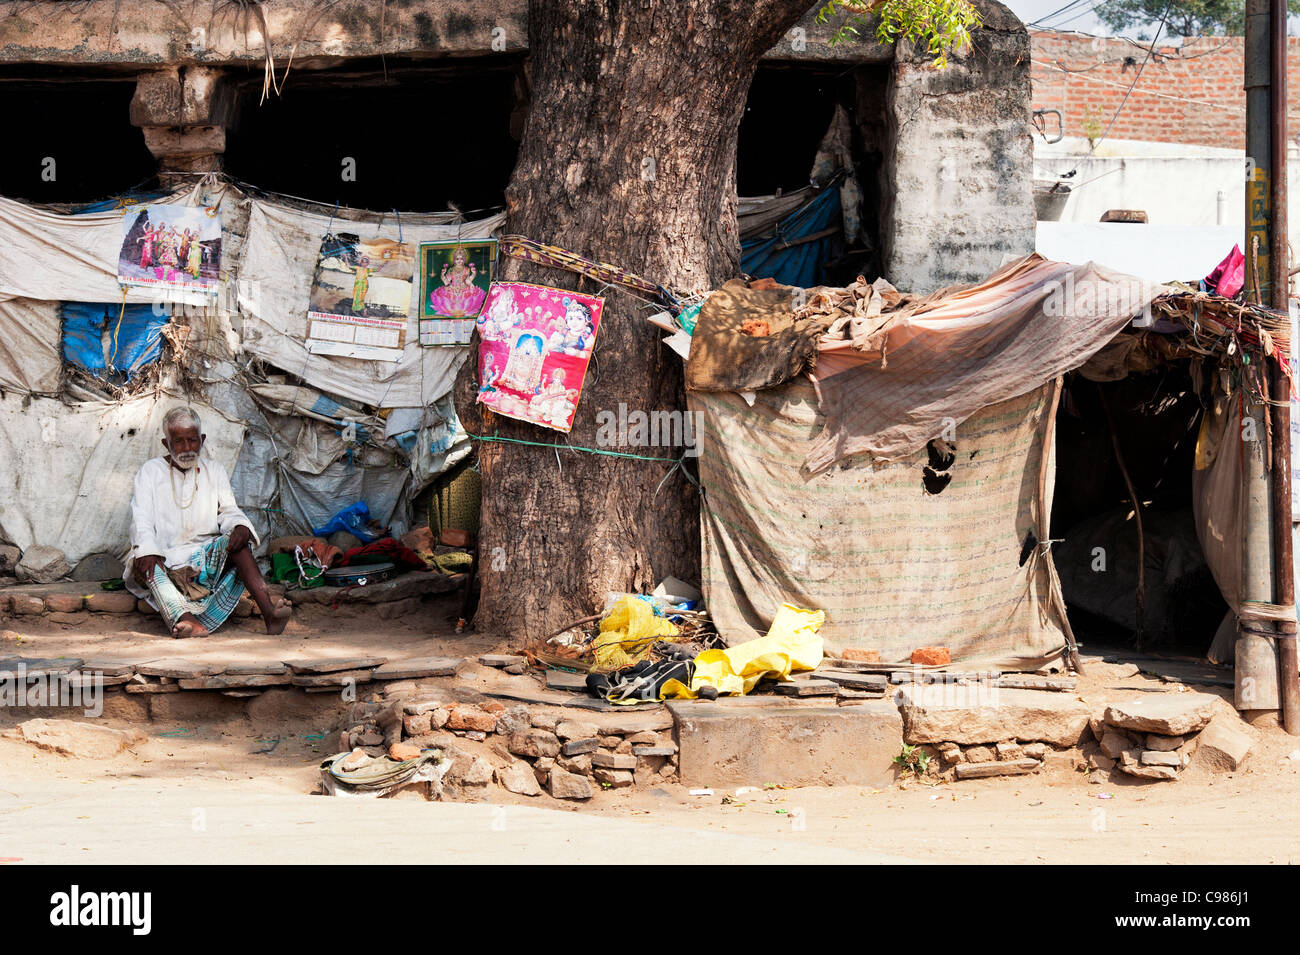 Old indian man on the streets in India next to his makeshift tent home . Andhra Pradesh, India Stock Photo